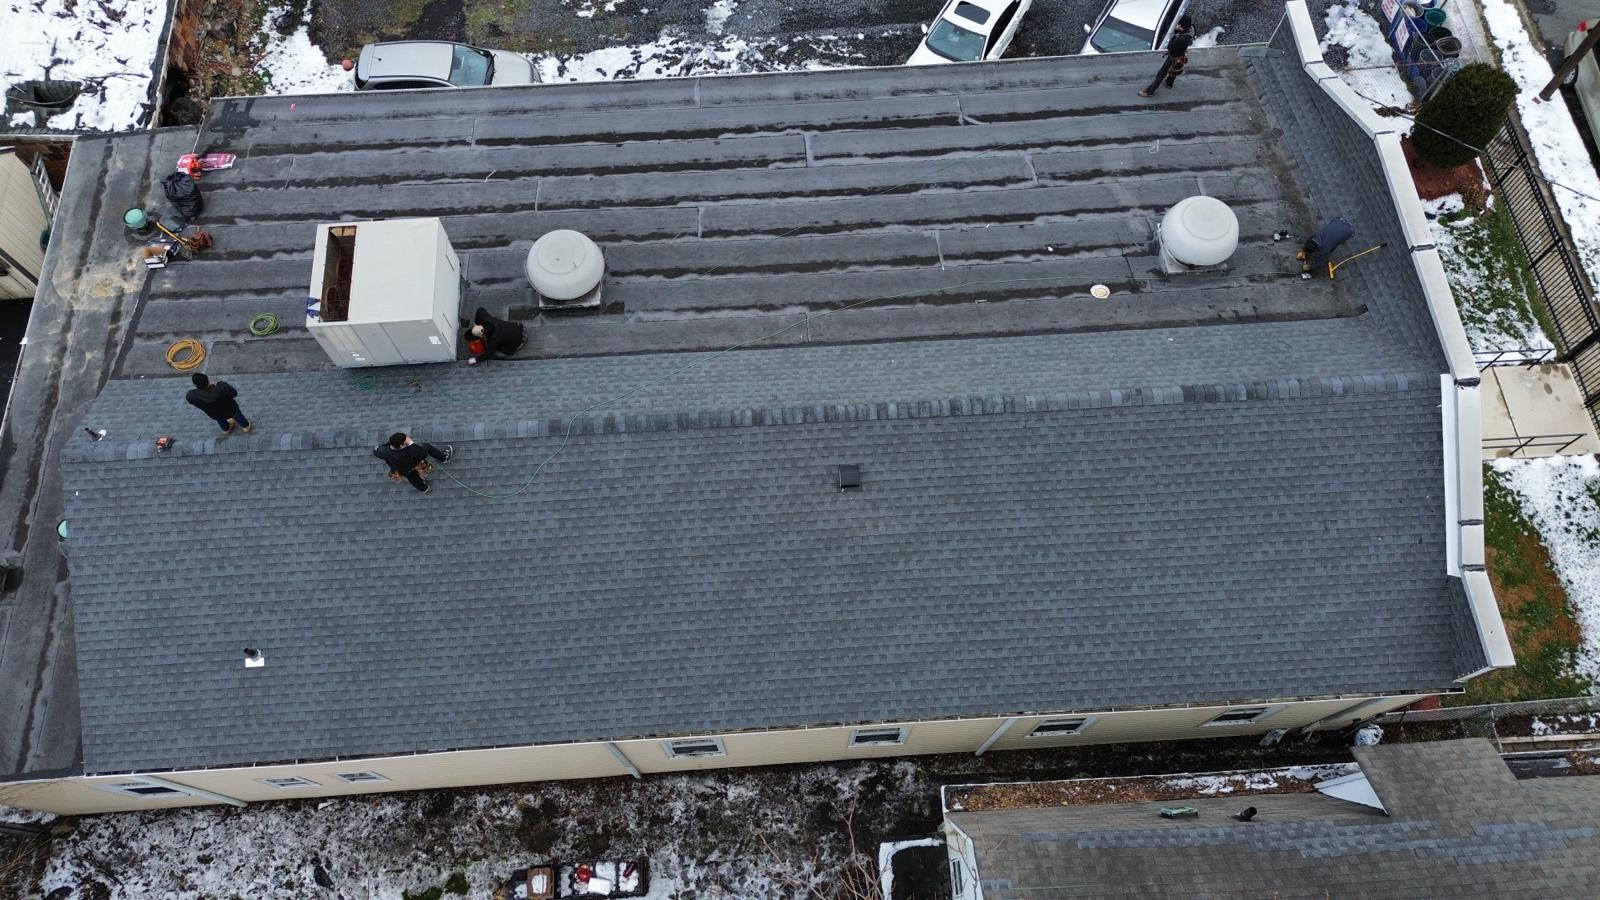 New Roof Installation in Perth Amboy NJ Project Shot 21